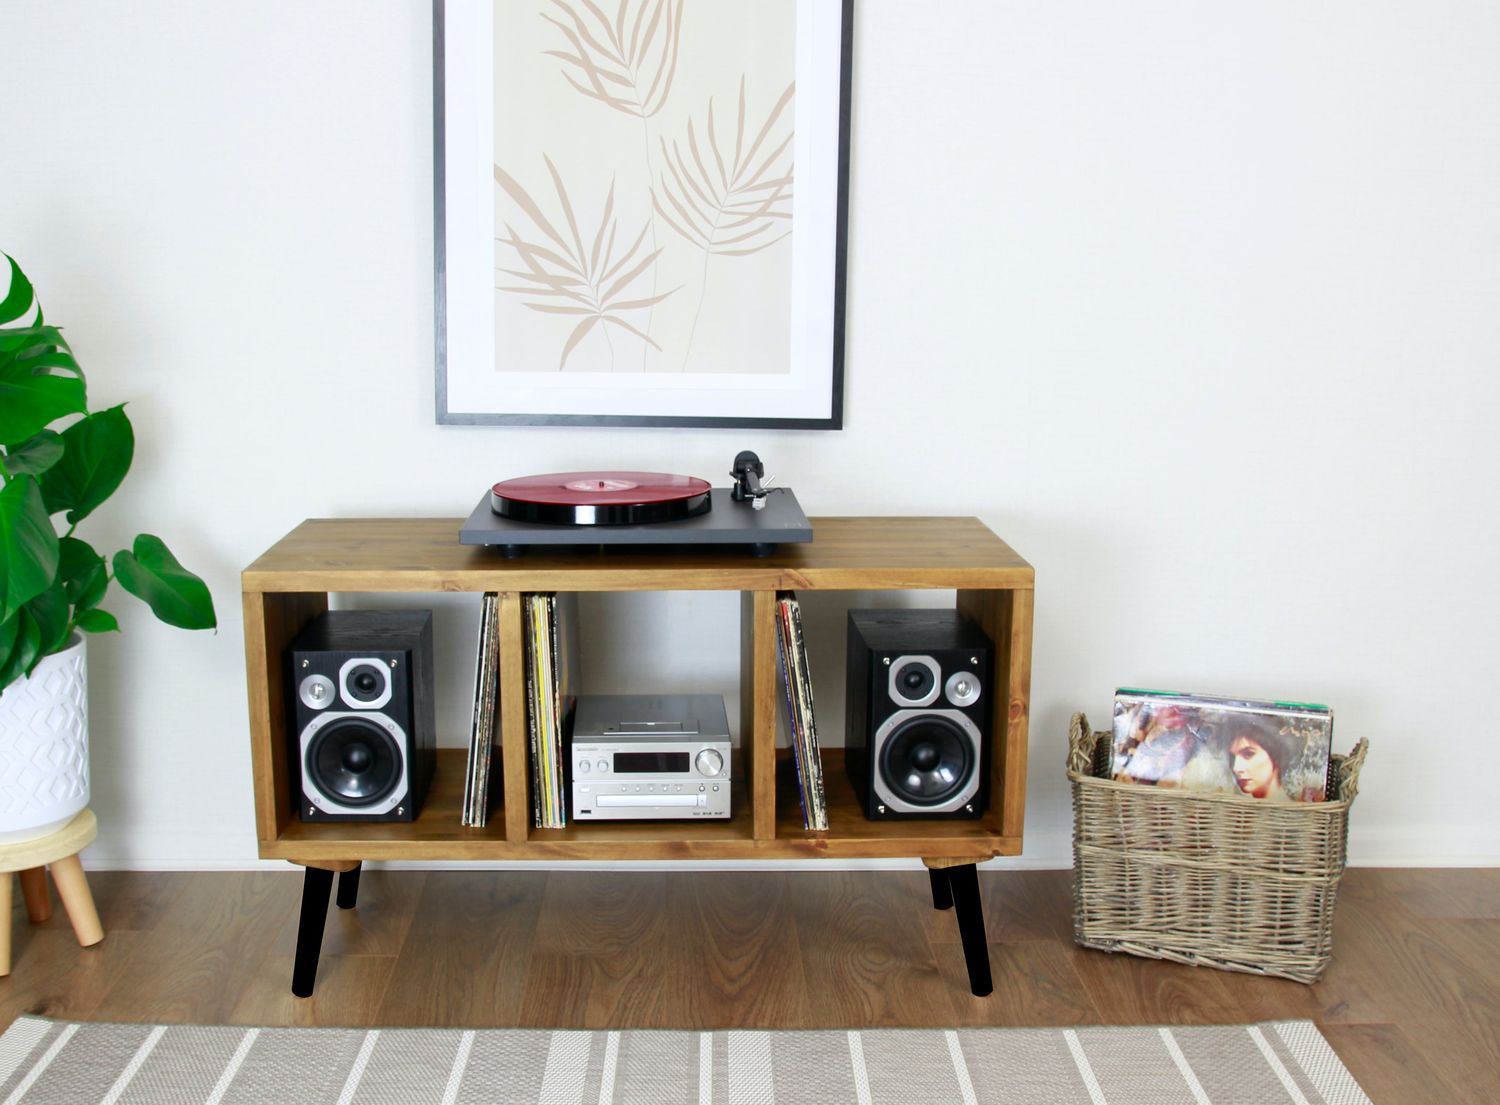 How To Put A Turntable In A TV Stand